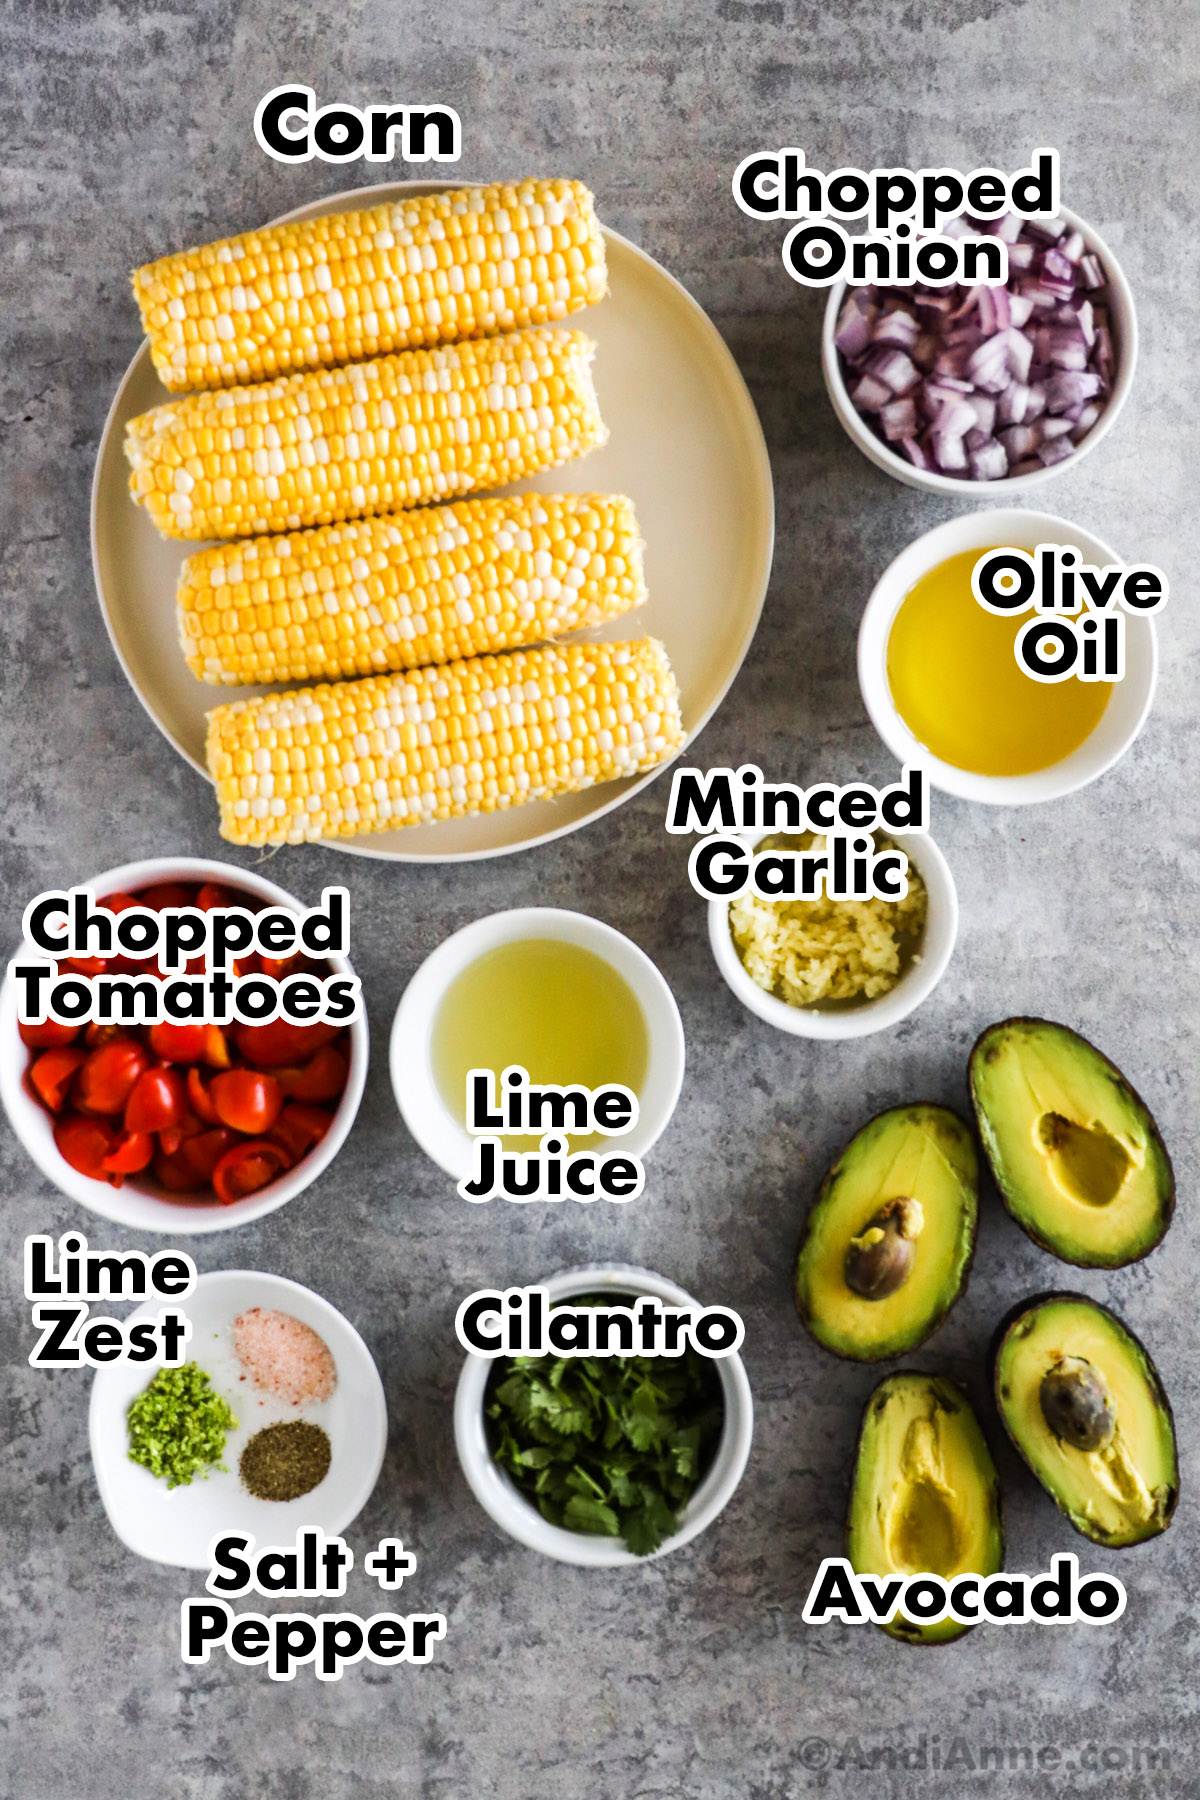 Recipe ingredients in bowls including corn, bowls of chopped onion, olive oil, minced garlic, lime juice, chopped tomatoes, avocado, cilantro and spices.